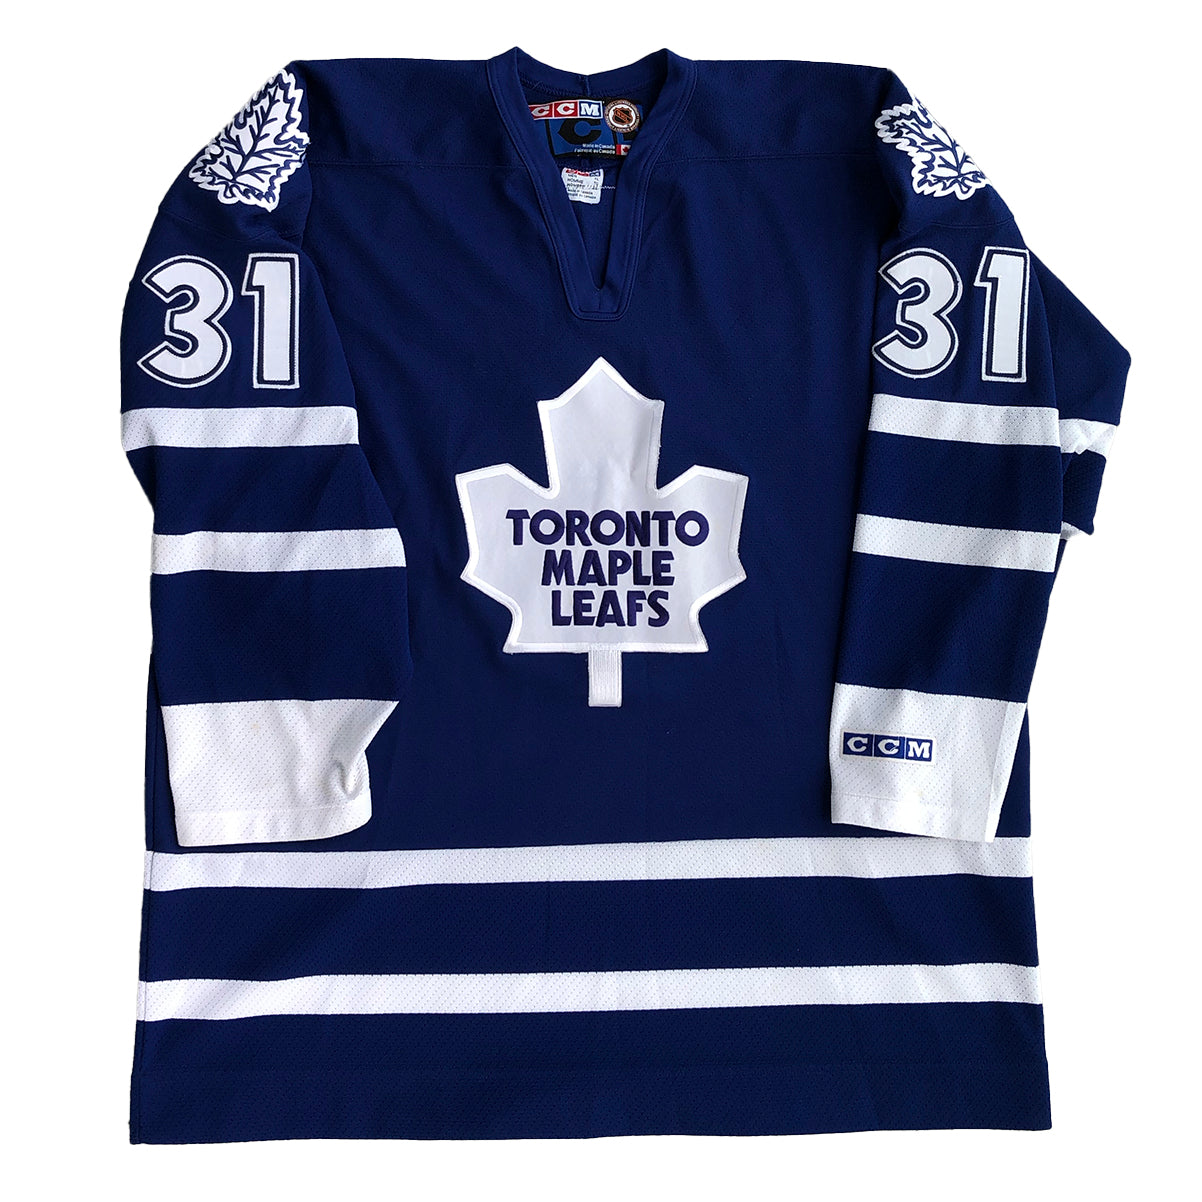 Preowned As-Is CCM NHL Toronto Maple Leafs #31 Curtis Joseph Stitch jersey  R3